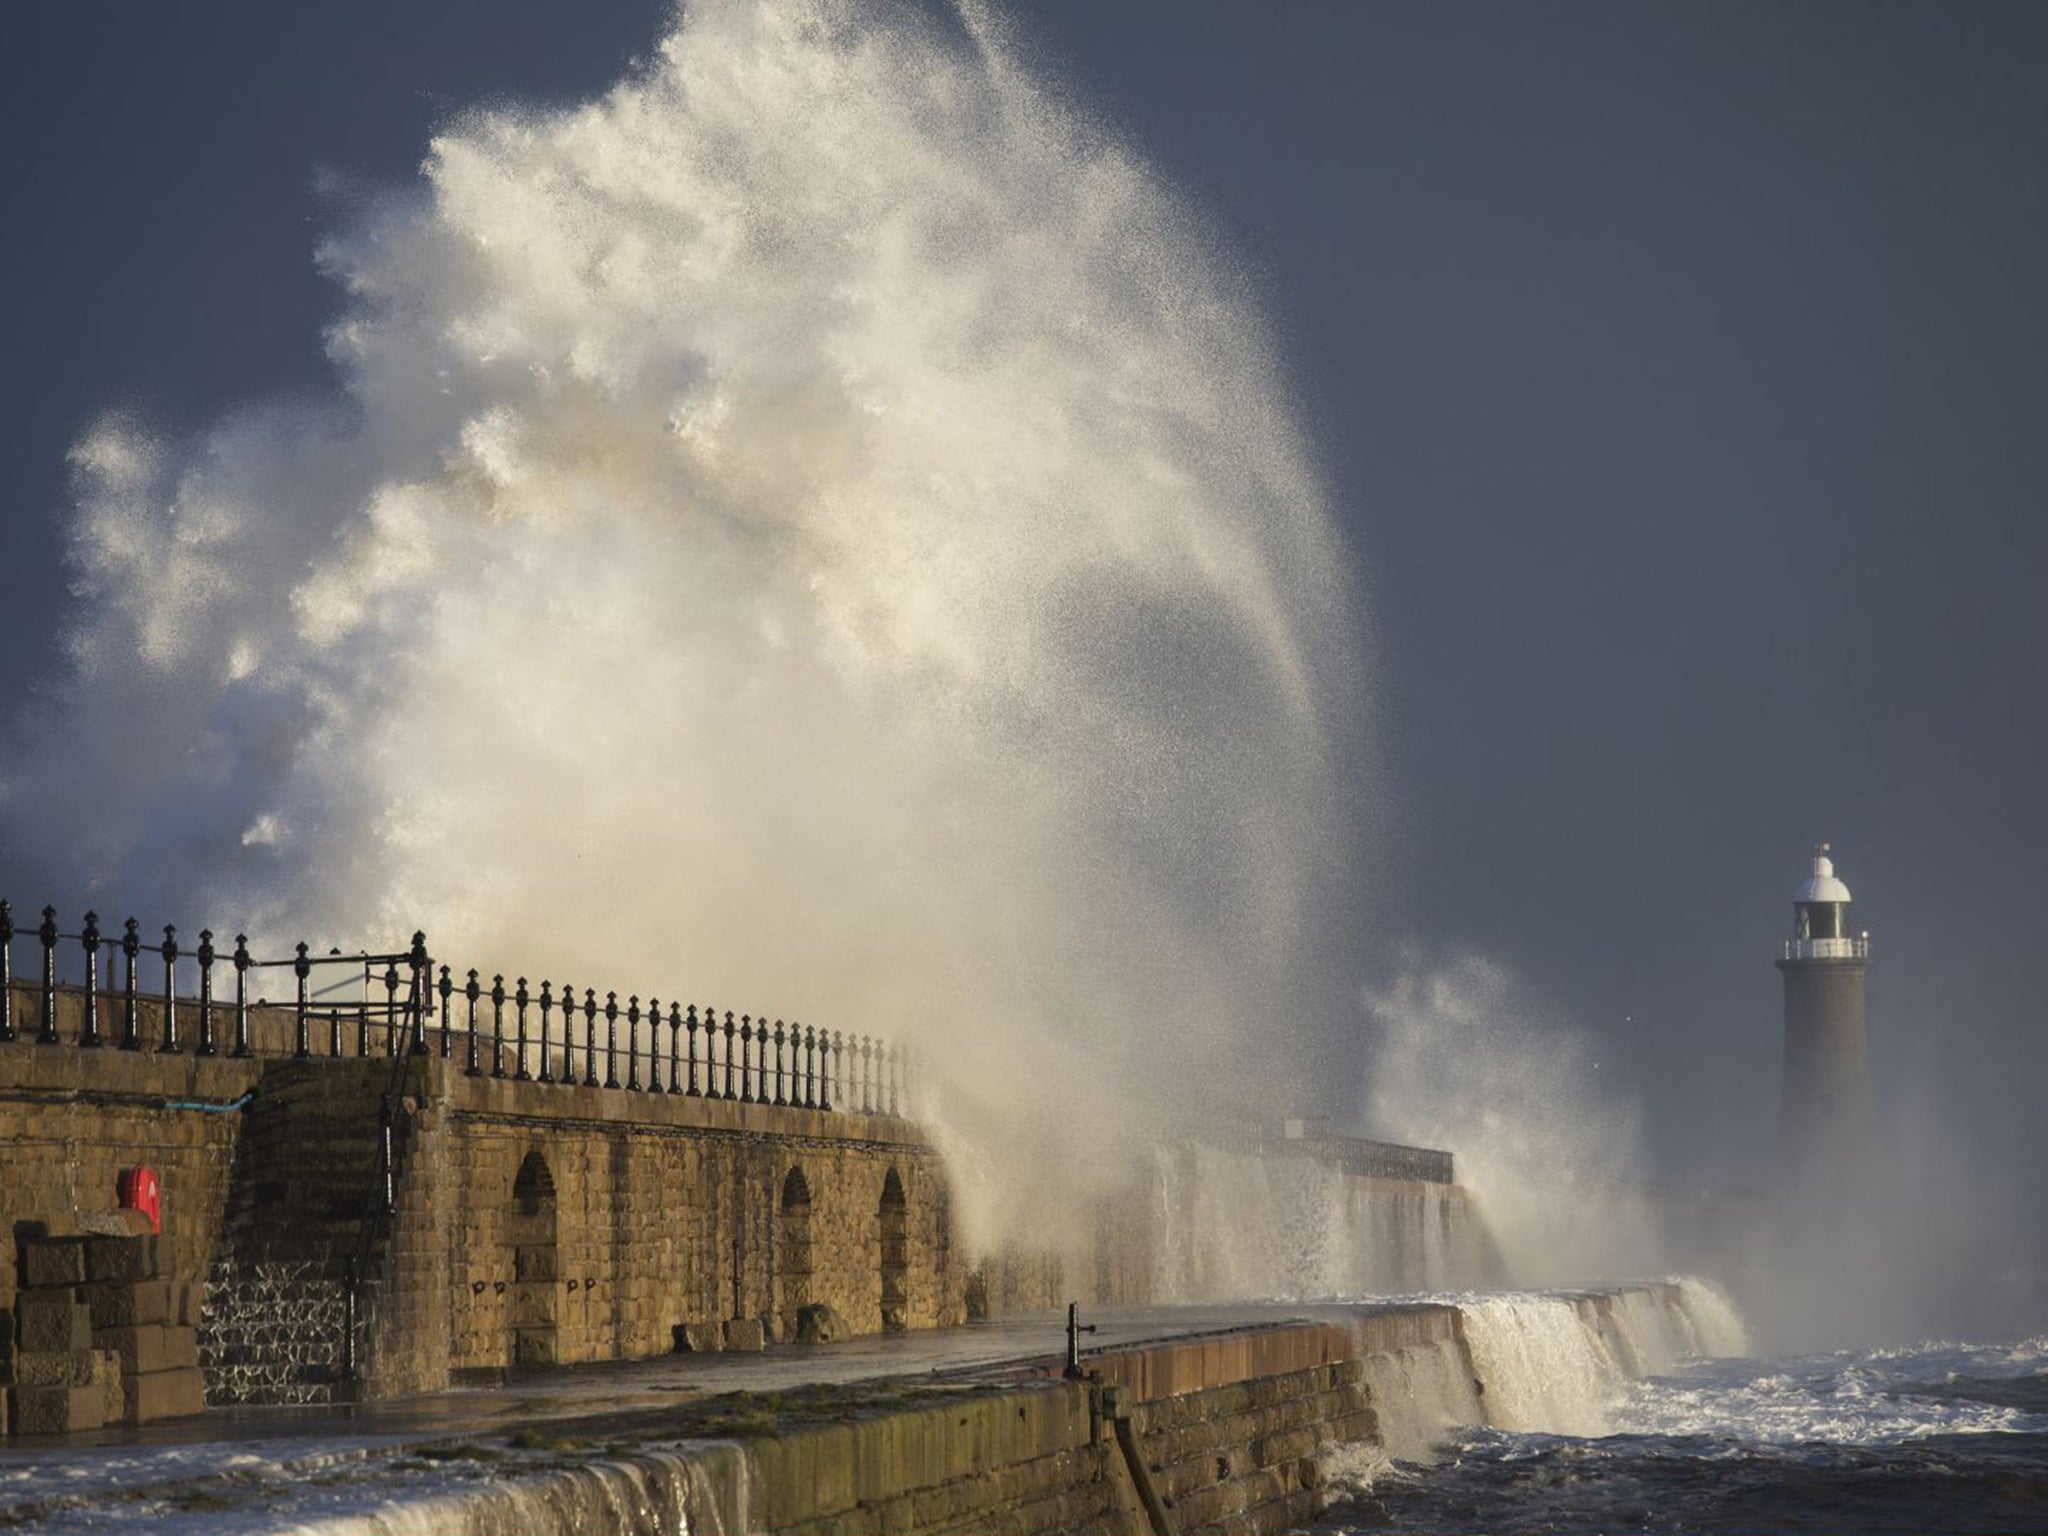 Strong winds sent high waves crashing over Tynemouth Pier in Tyneside on Friday